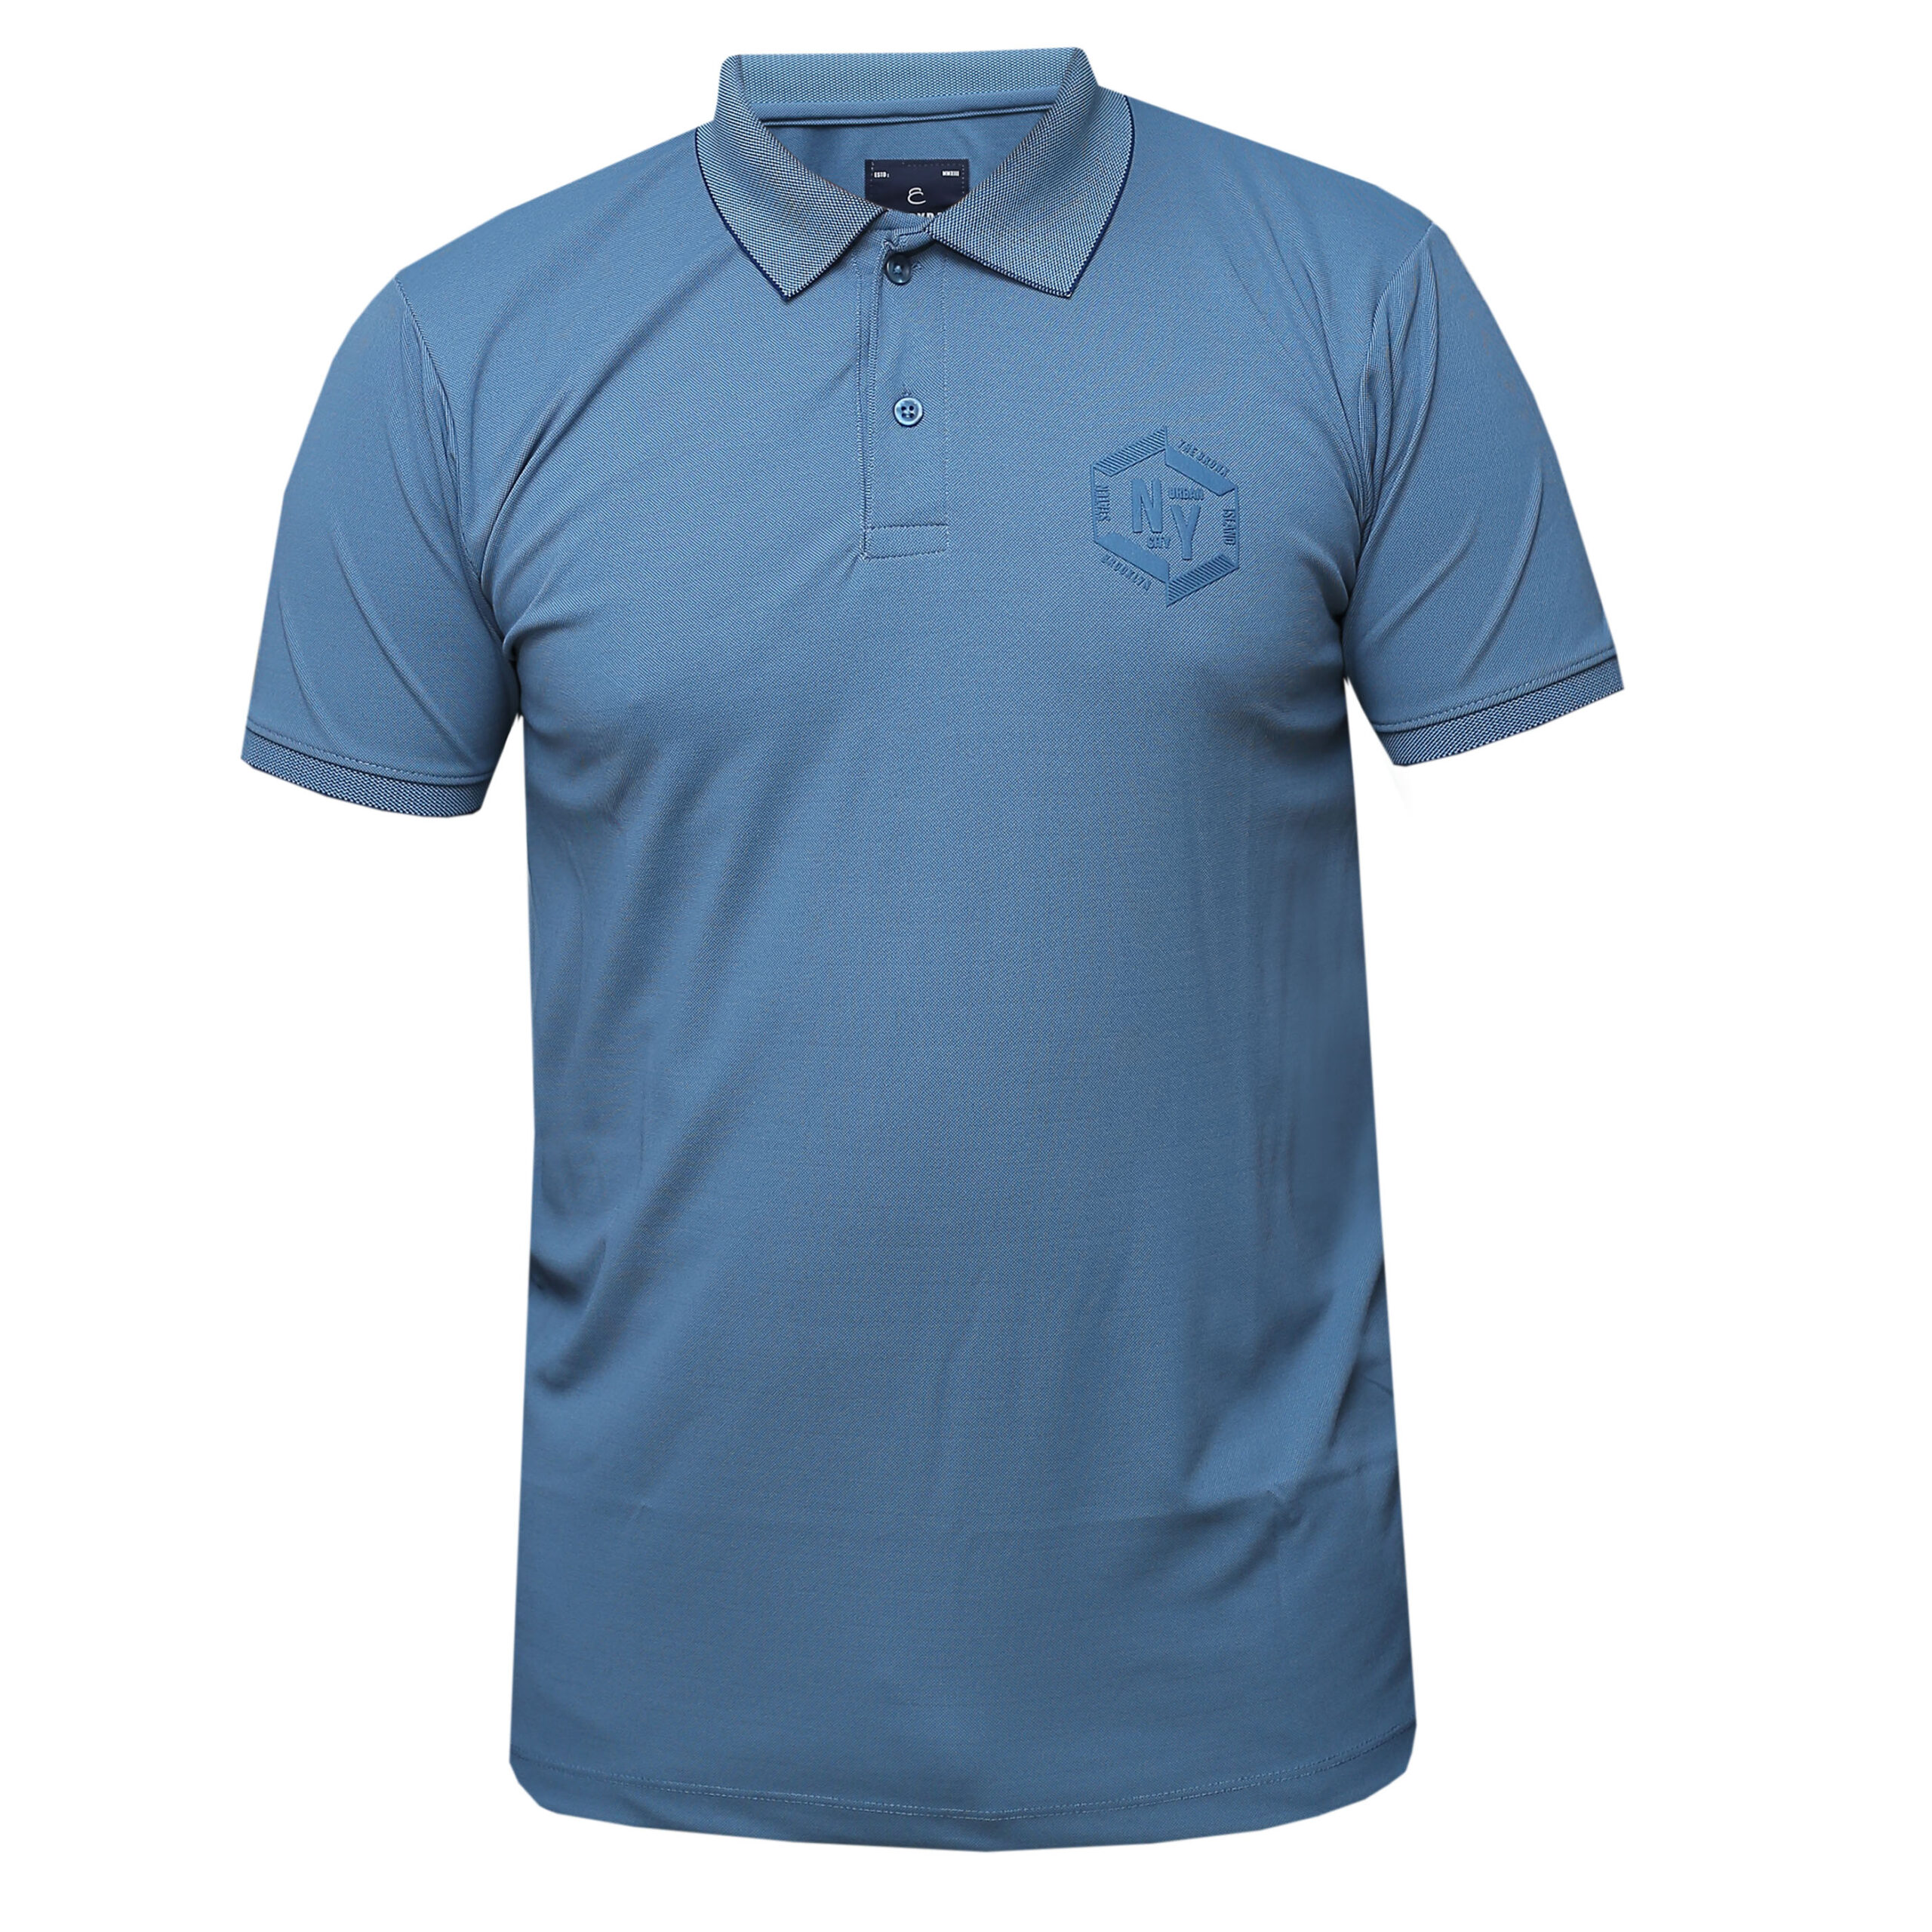 Everyday Collar Tees for Men - Quality Polos